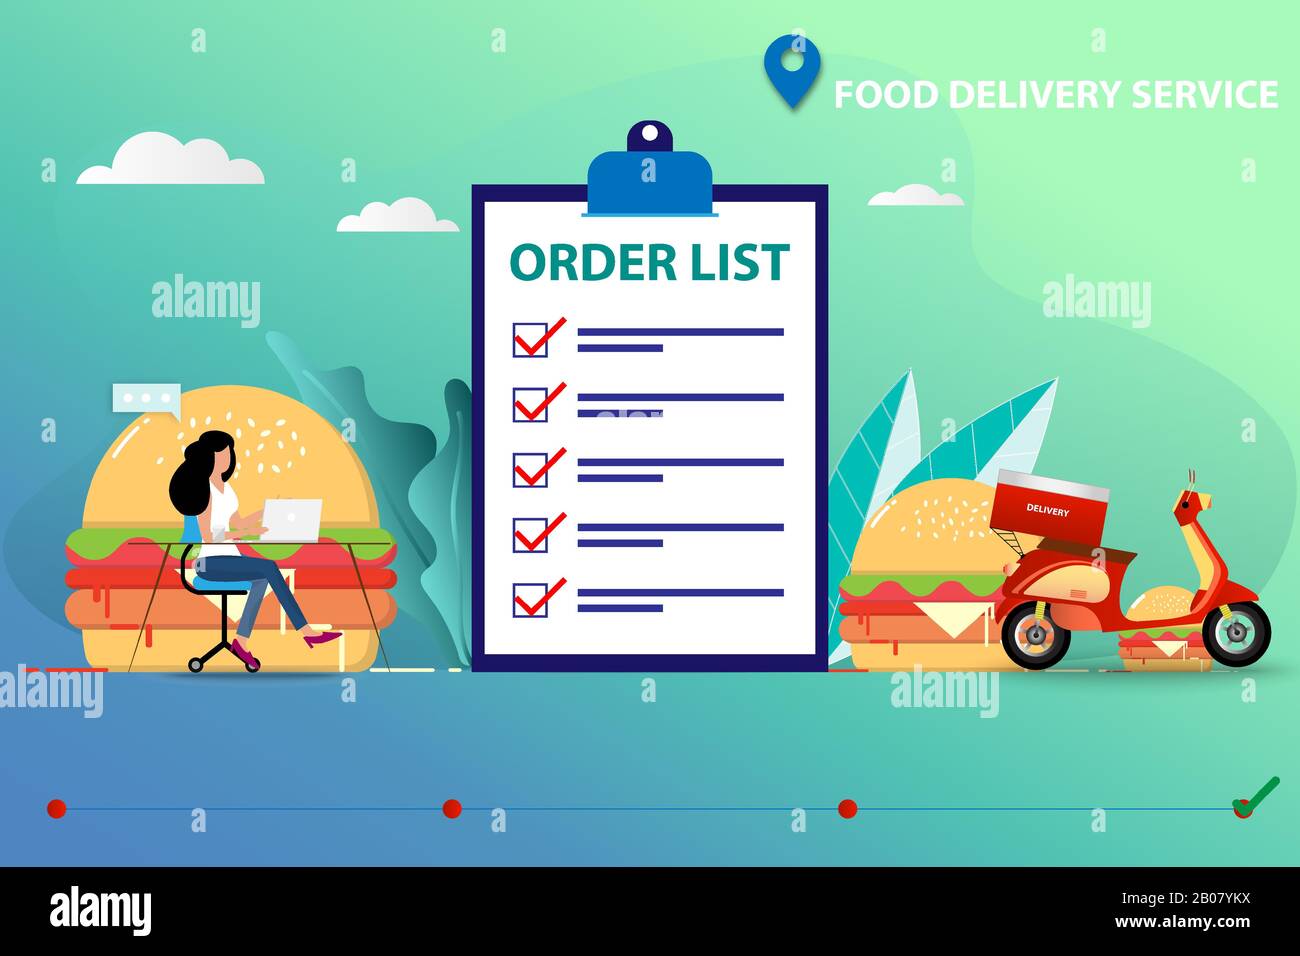 Business concept of food delivery service, staff is entering the order in laptop to prepare the food and ship to the customer by scooter. Stock Vector